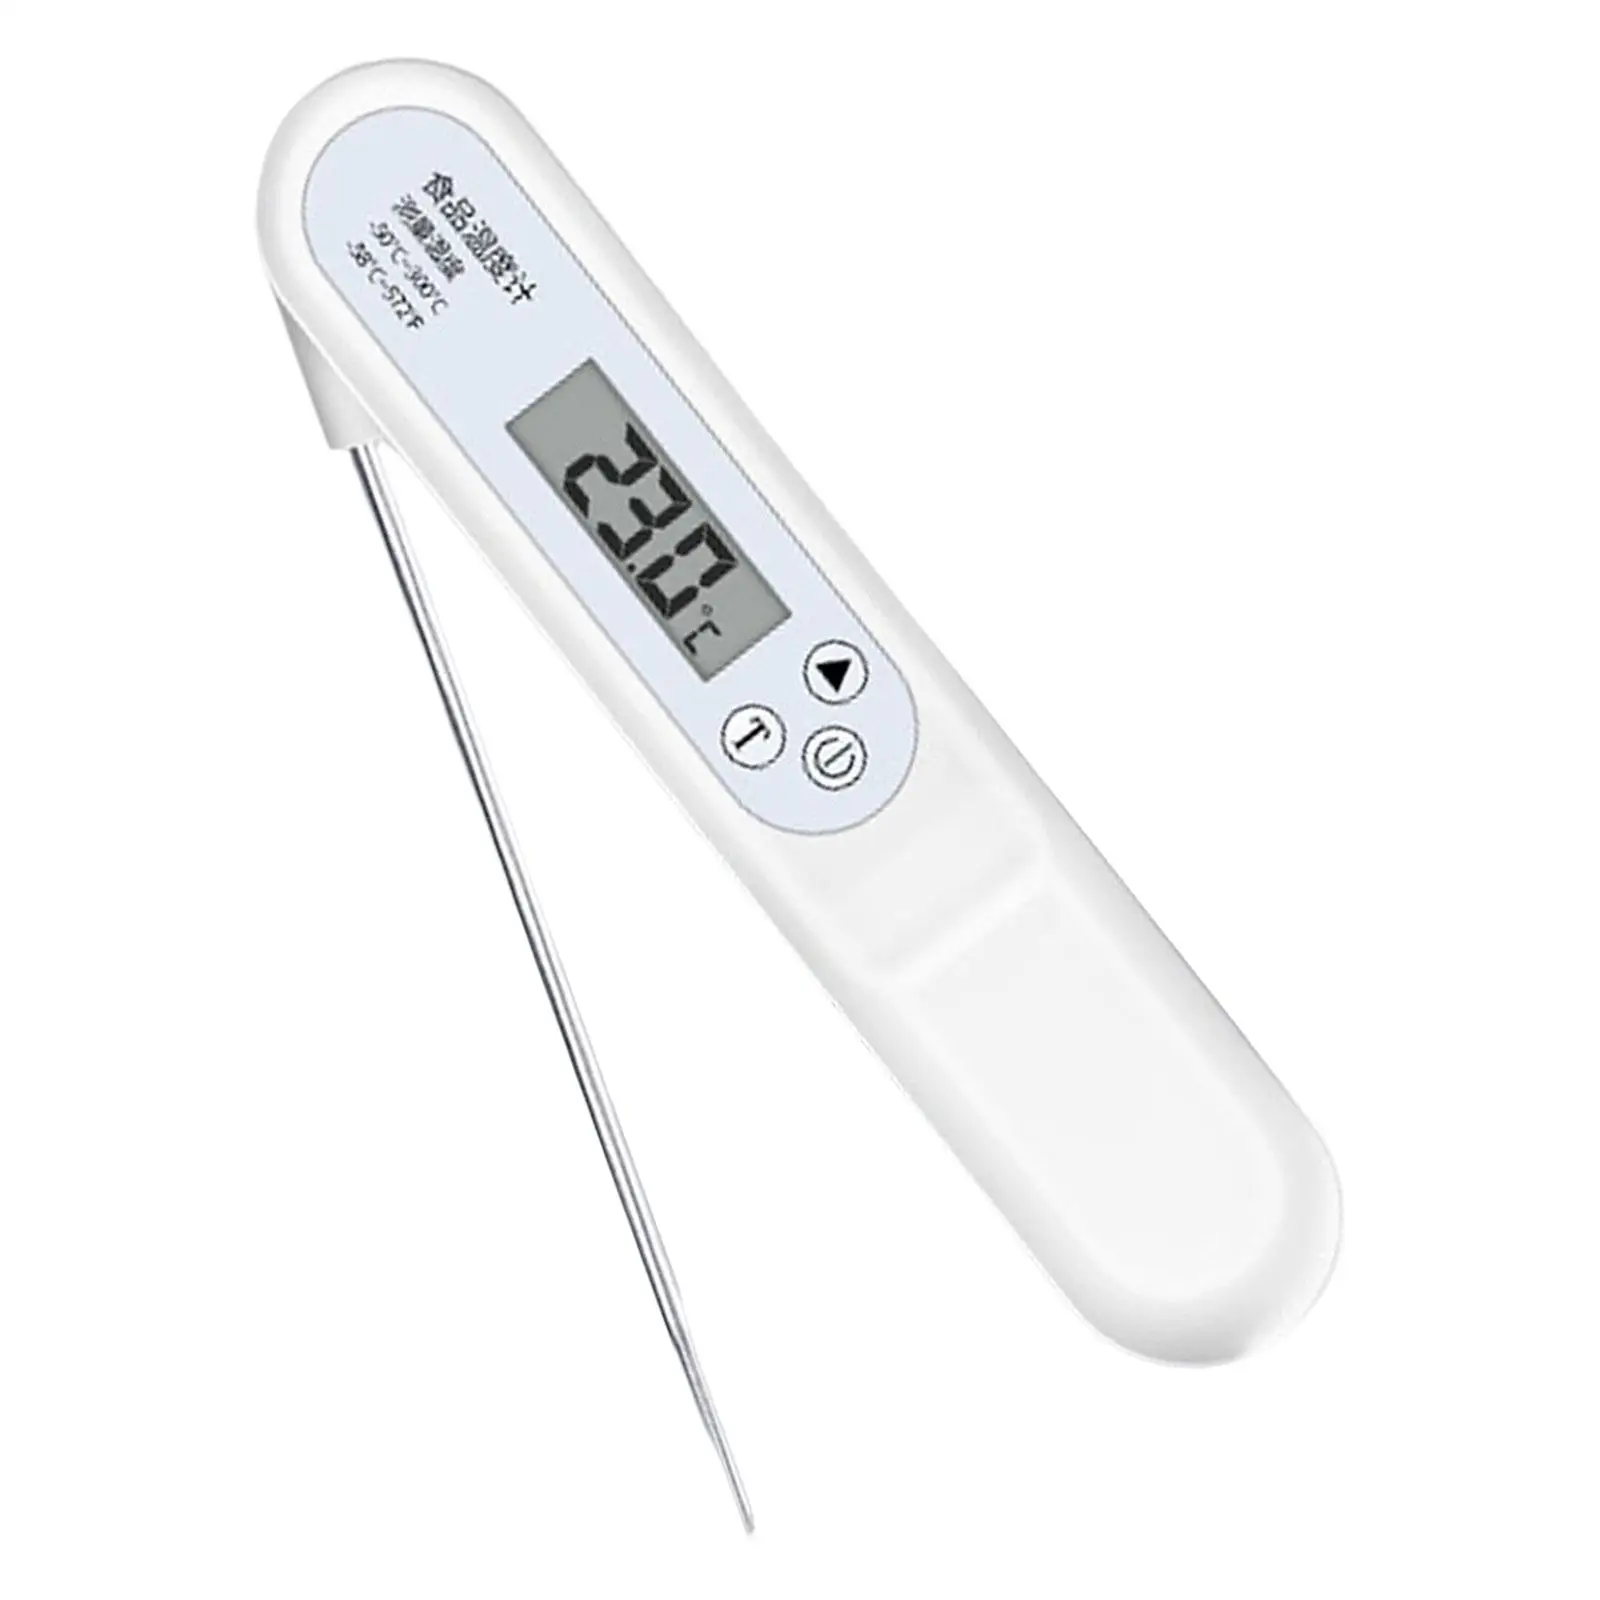 Food Thermometer LCD Display Screen Waterproof Meat Thermometer for Frying